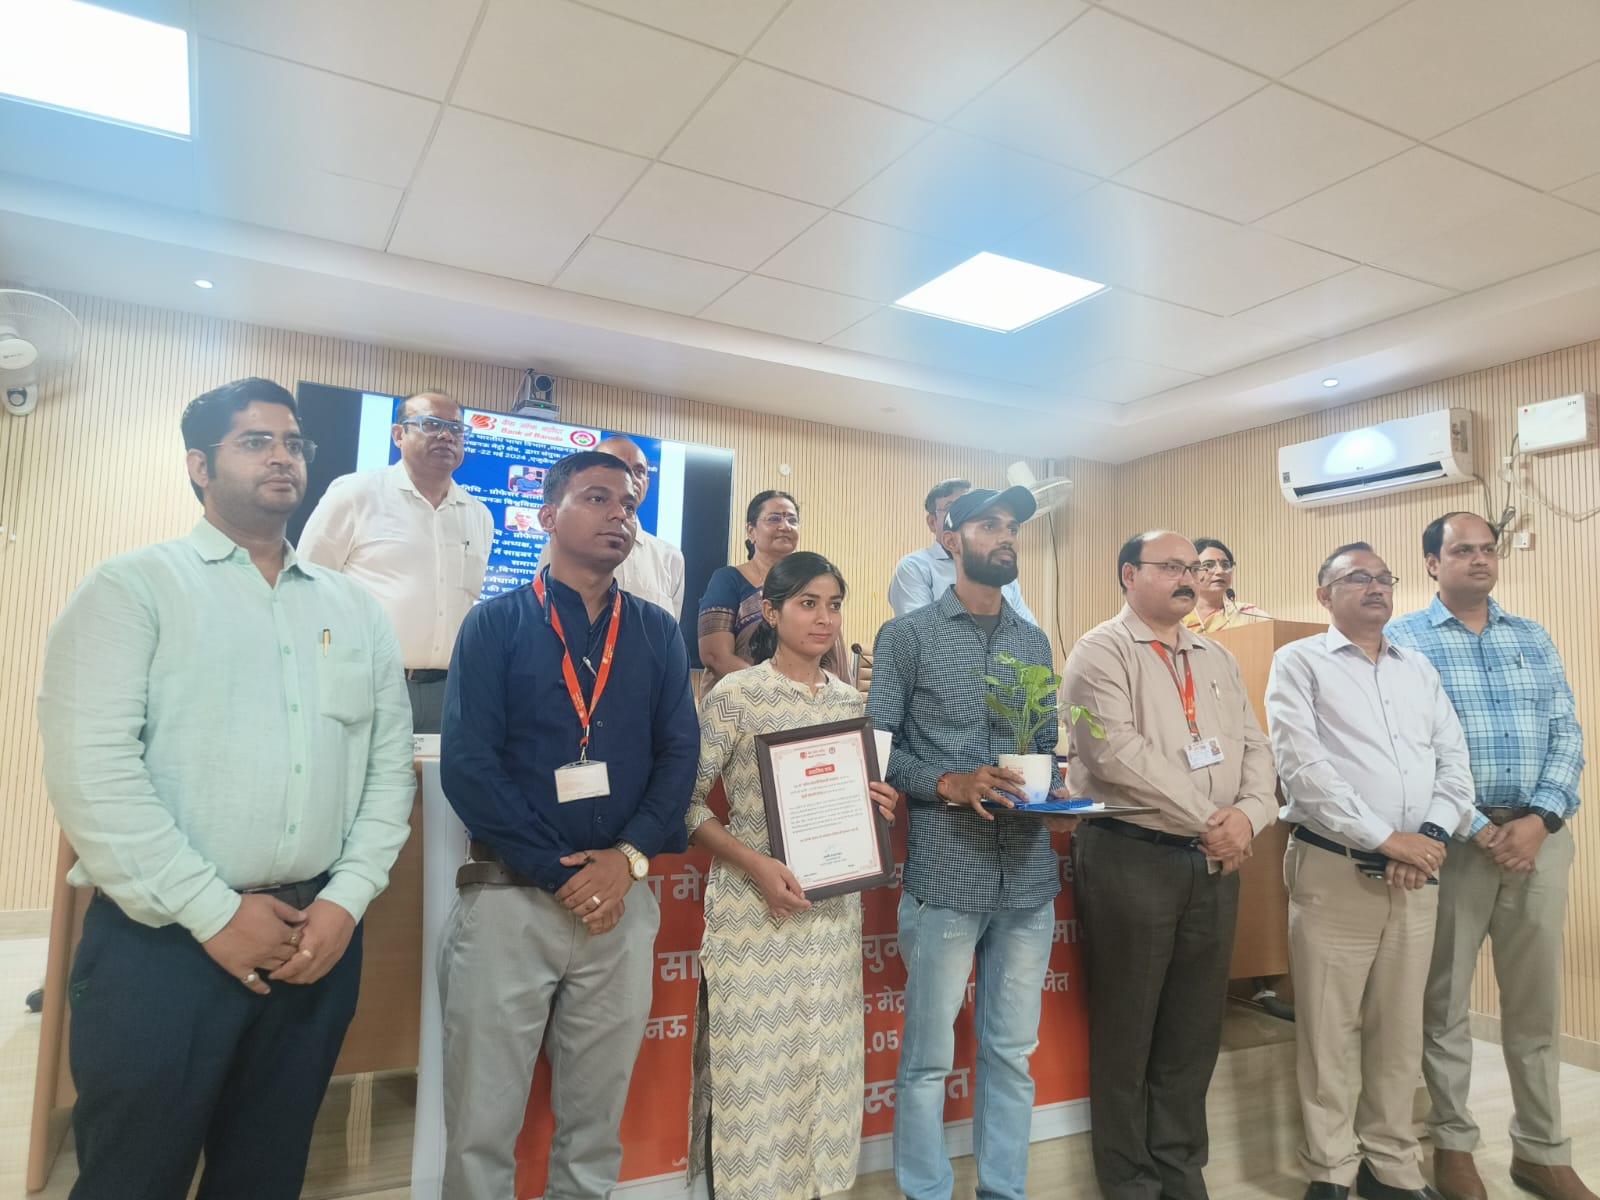 Student Mohini Patel and student Akash Kumar were honored with cash amount of Rs 11000 and Rs 7500 respectively and a citation by Bank of Baroda.